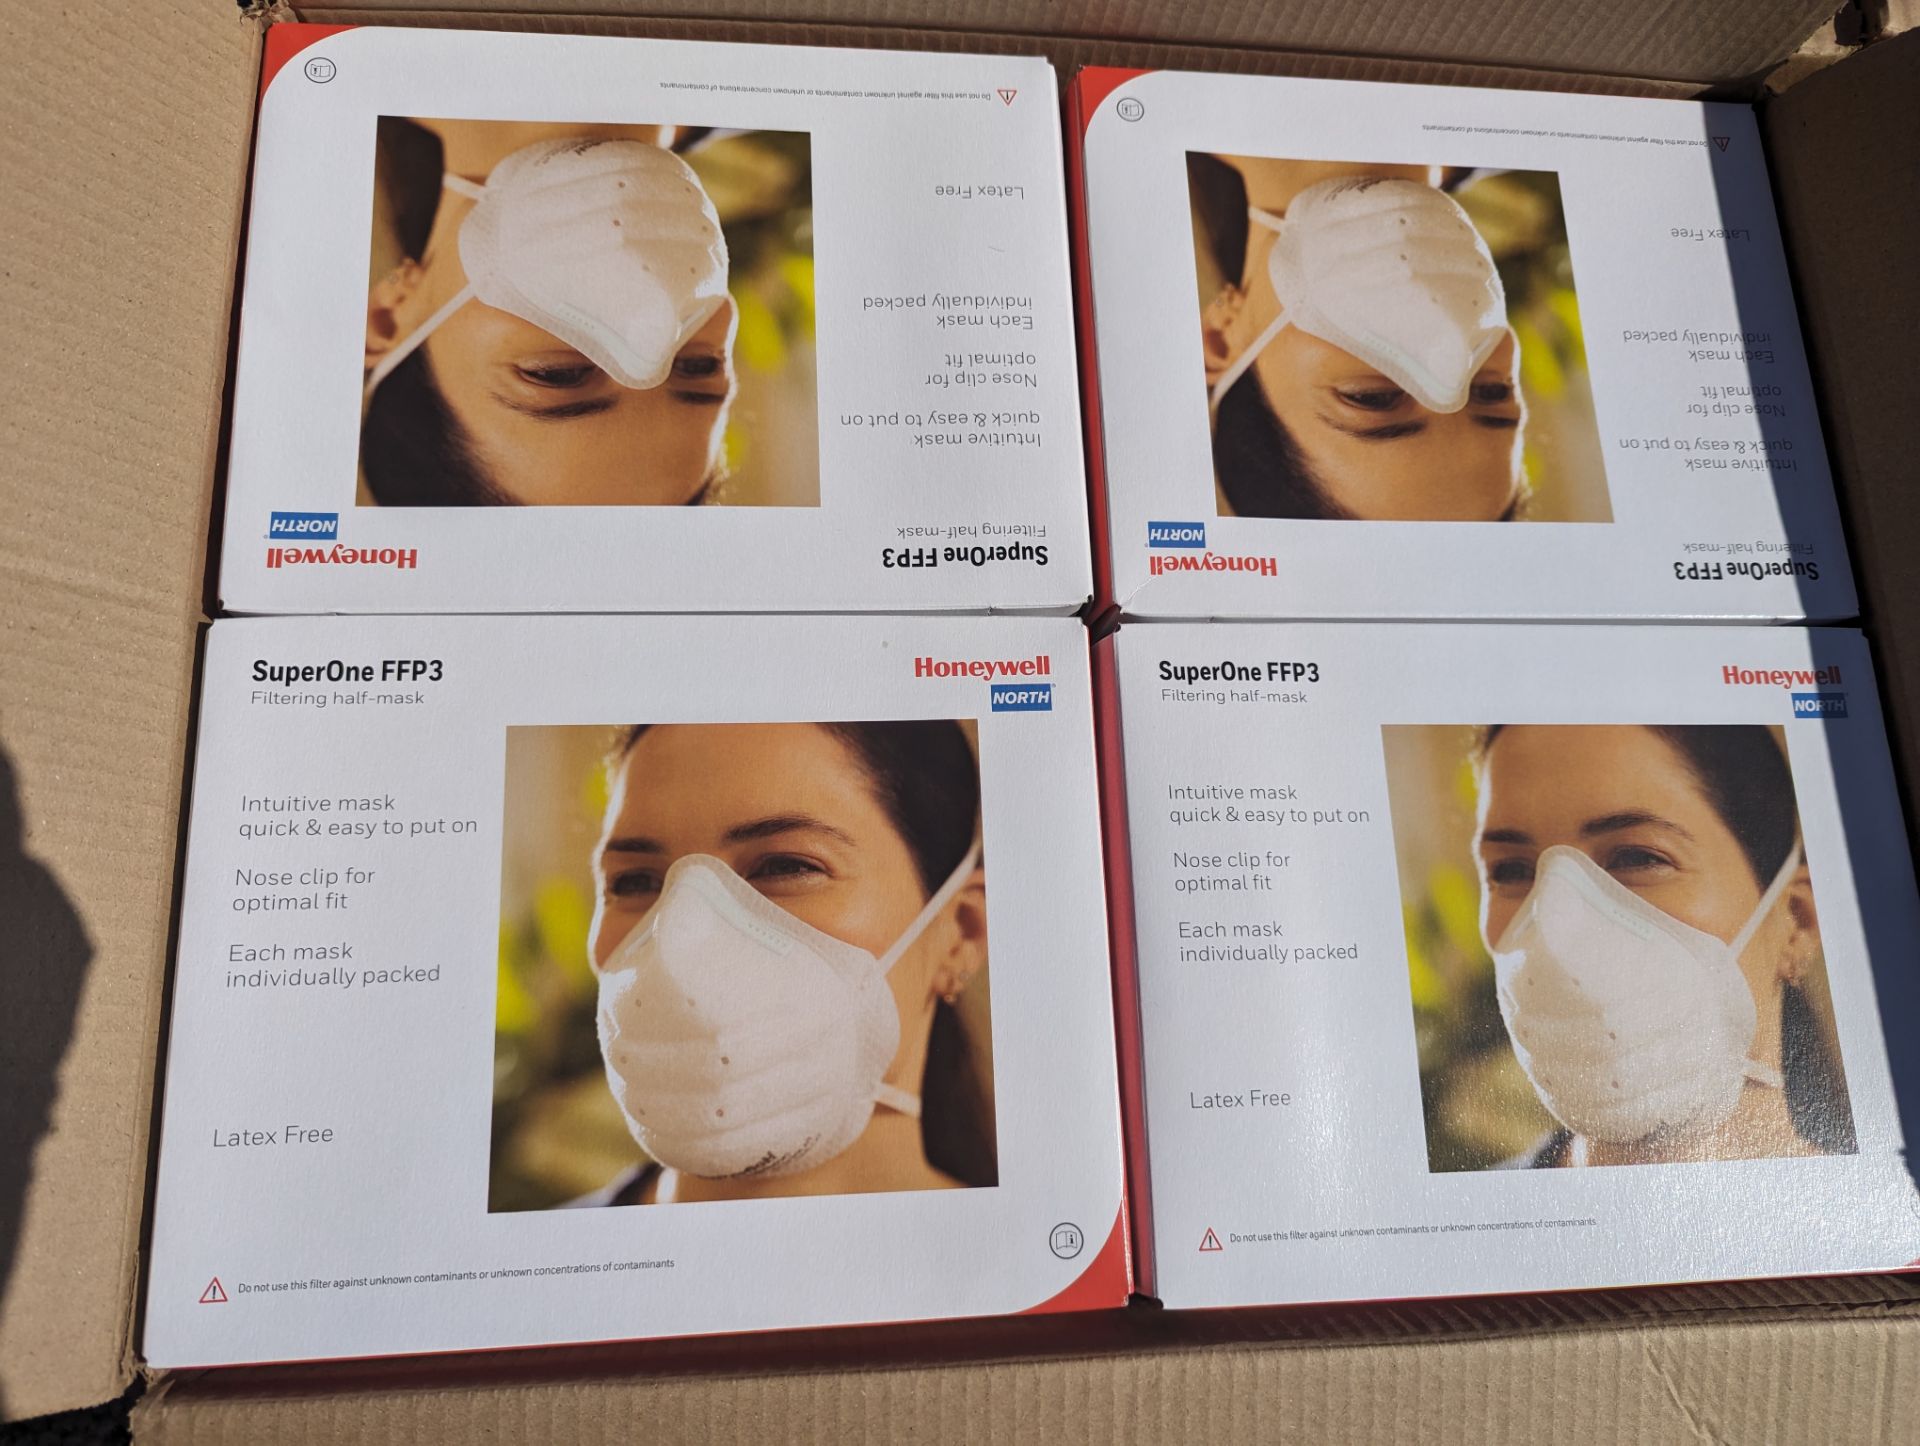 4x Boxes Honeywell SuperOne V2 ip2 FFP3 Half Mask Filter, 12 Packs of 16 Units Each Per Box - Image 4 of 6